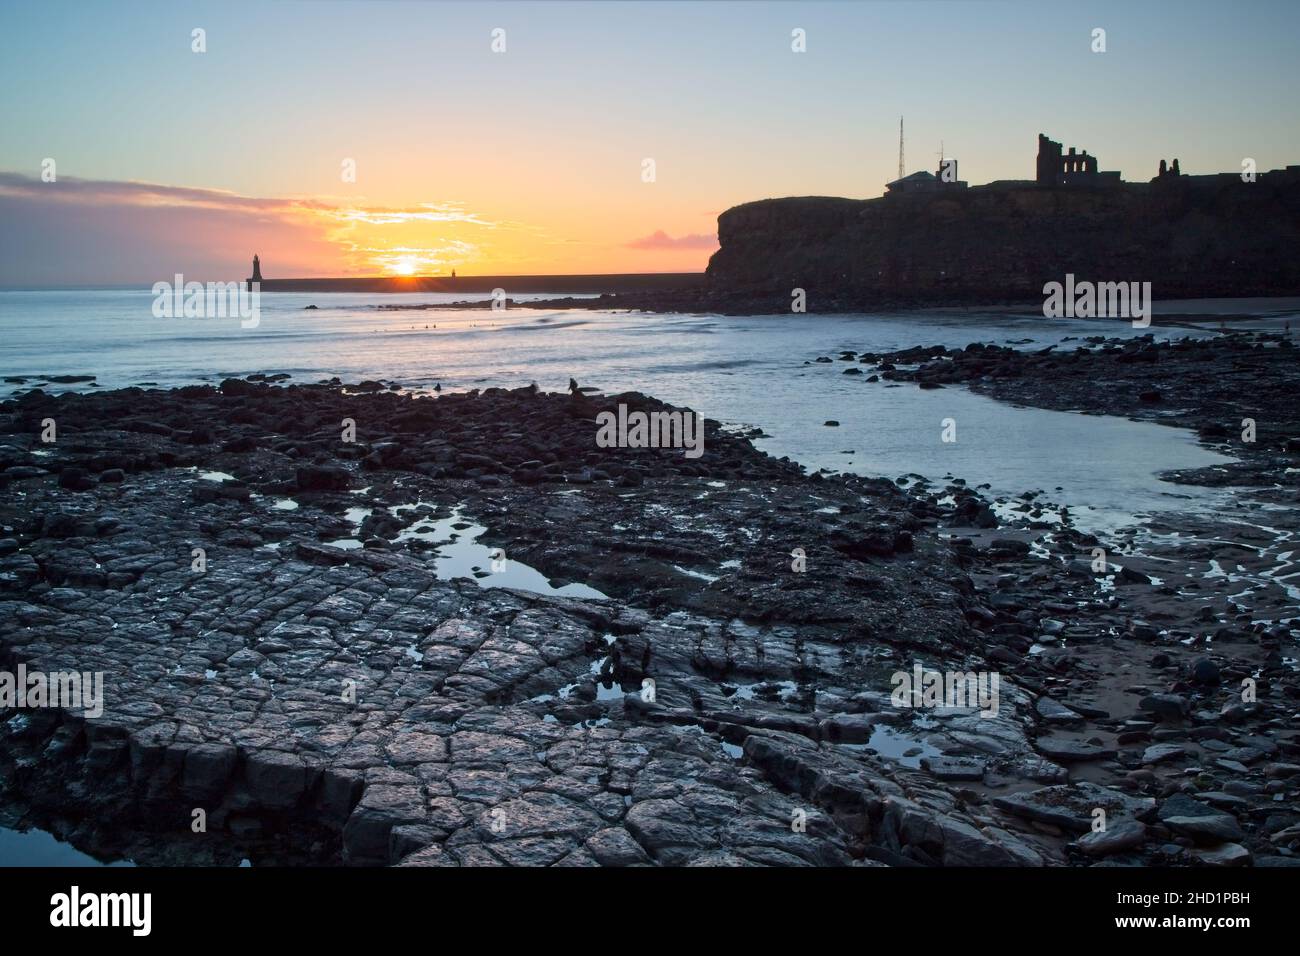 Sunrise at King Edwards Bay, Tynemouth, North Tyneside. The pier and priory are in silhouette in the background while rocks fill the foreground. Stock Photo